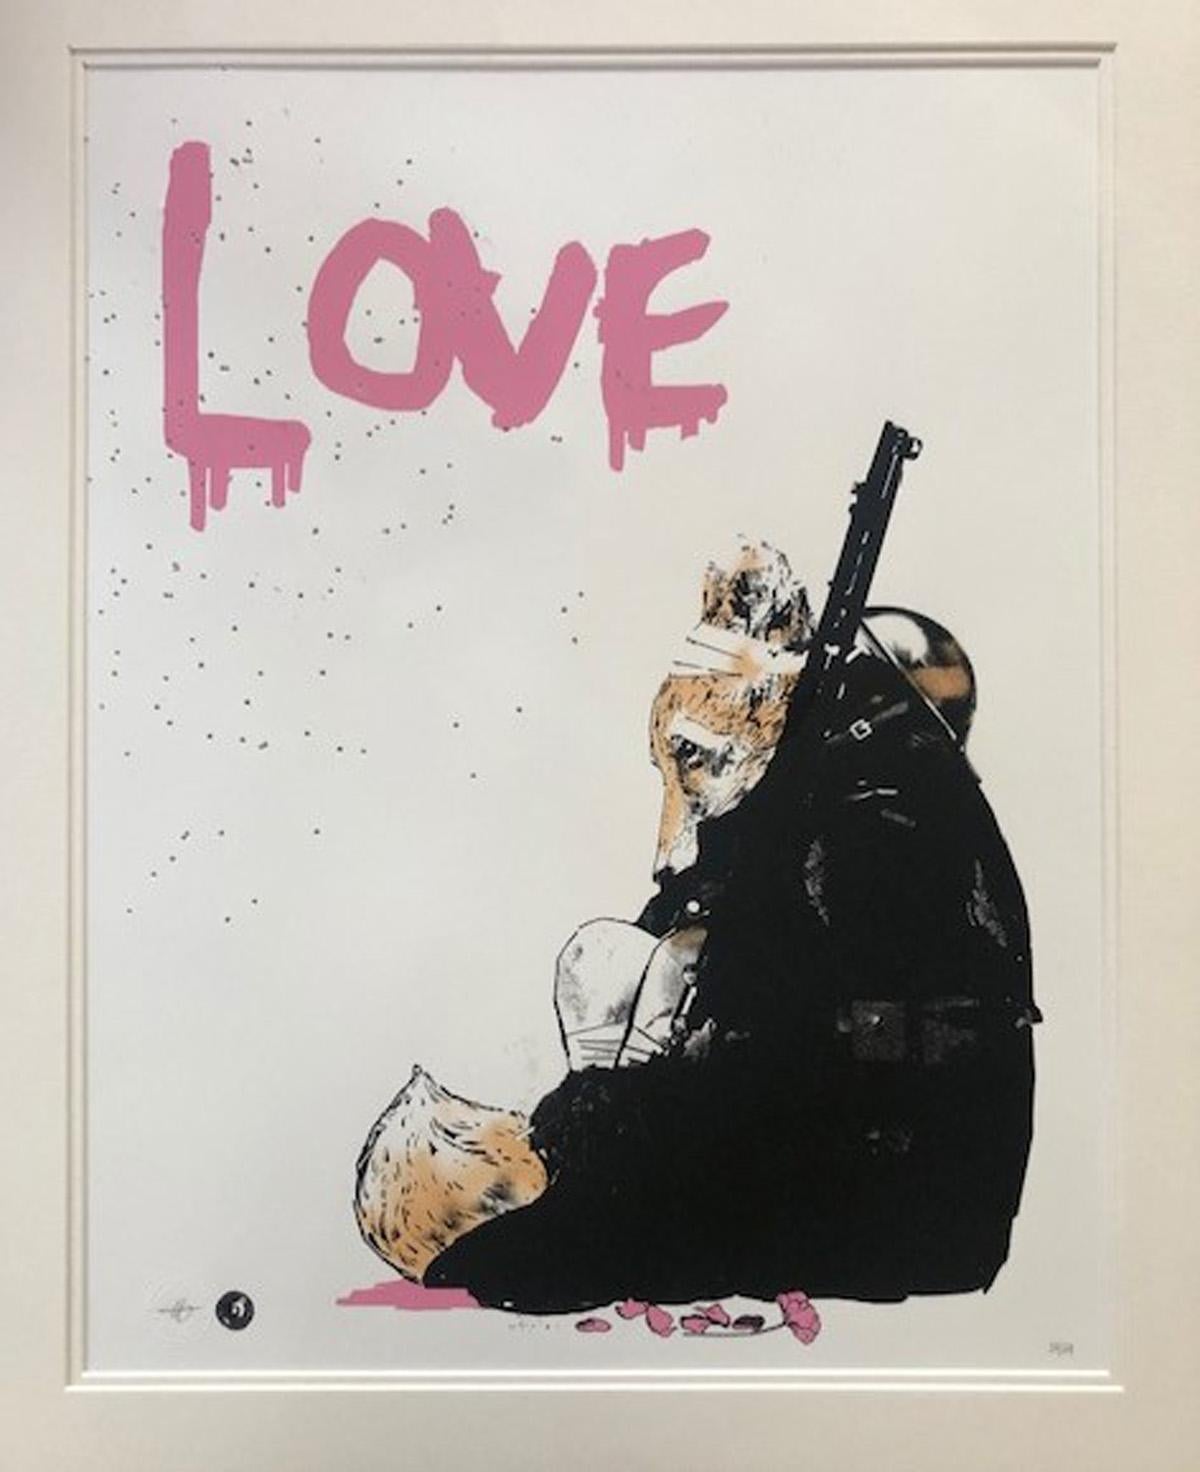 Harry Bunce
Love Wars Series, Frontline
Limited Edition Hand Pulled Silkscreen of 64
Image Size: H 63cm x W 49cm x D 0.1cm
Mounted Size: H 73cm x W 59cm x 0.5cm
Sold Unframed

Love Wars Series, Frontline is a limited edition silkscreen print by